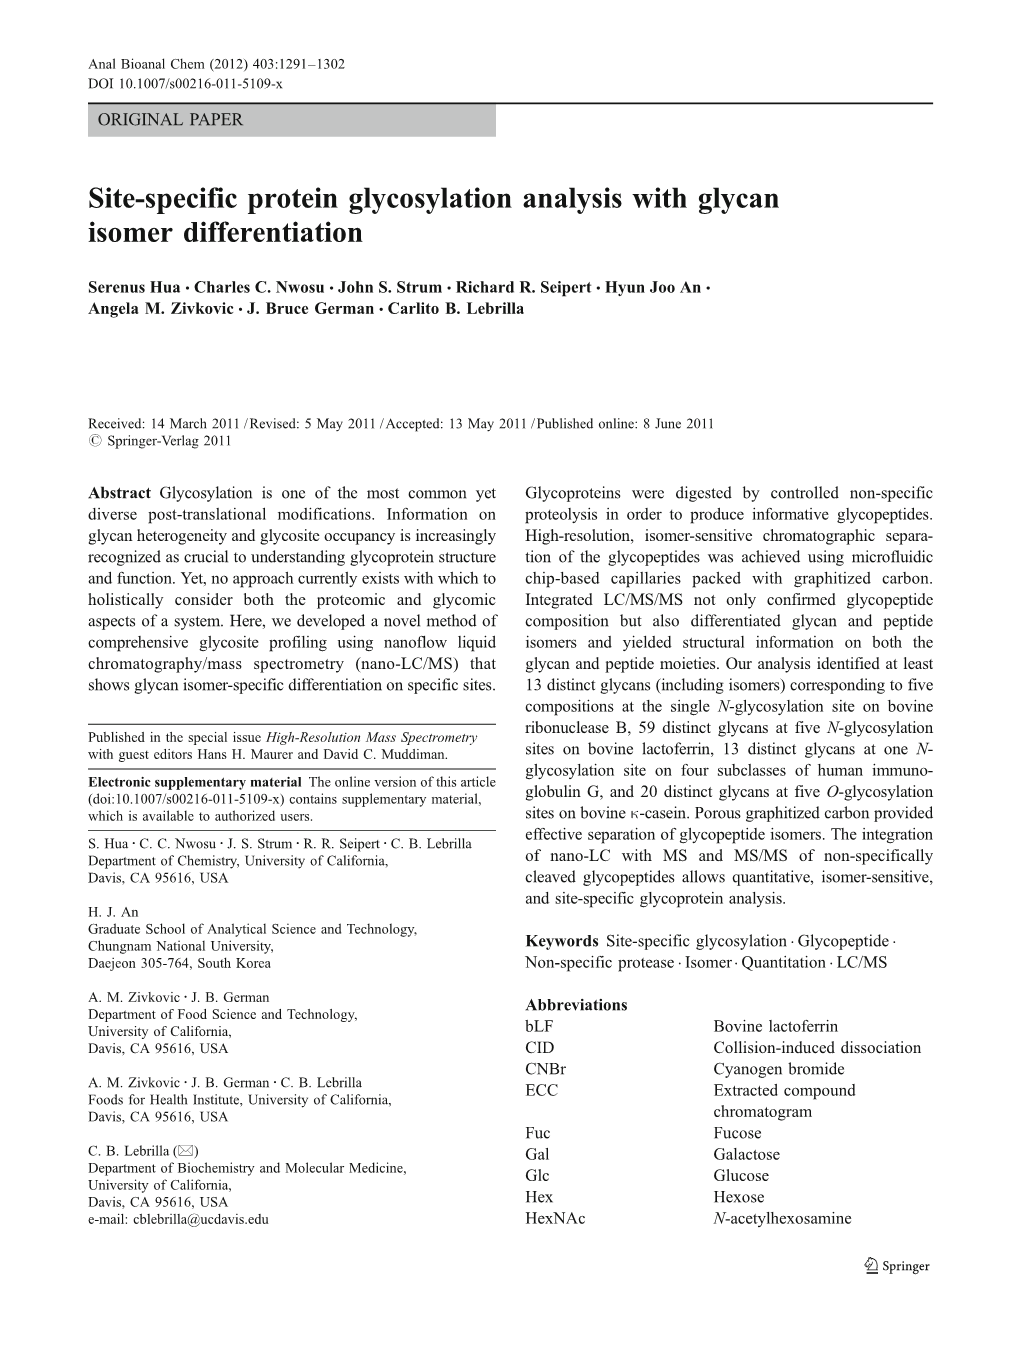 Site-Specific Protein Glycosylation Analysis with Glycan Isomer Differentiation